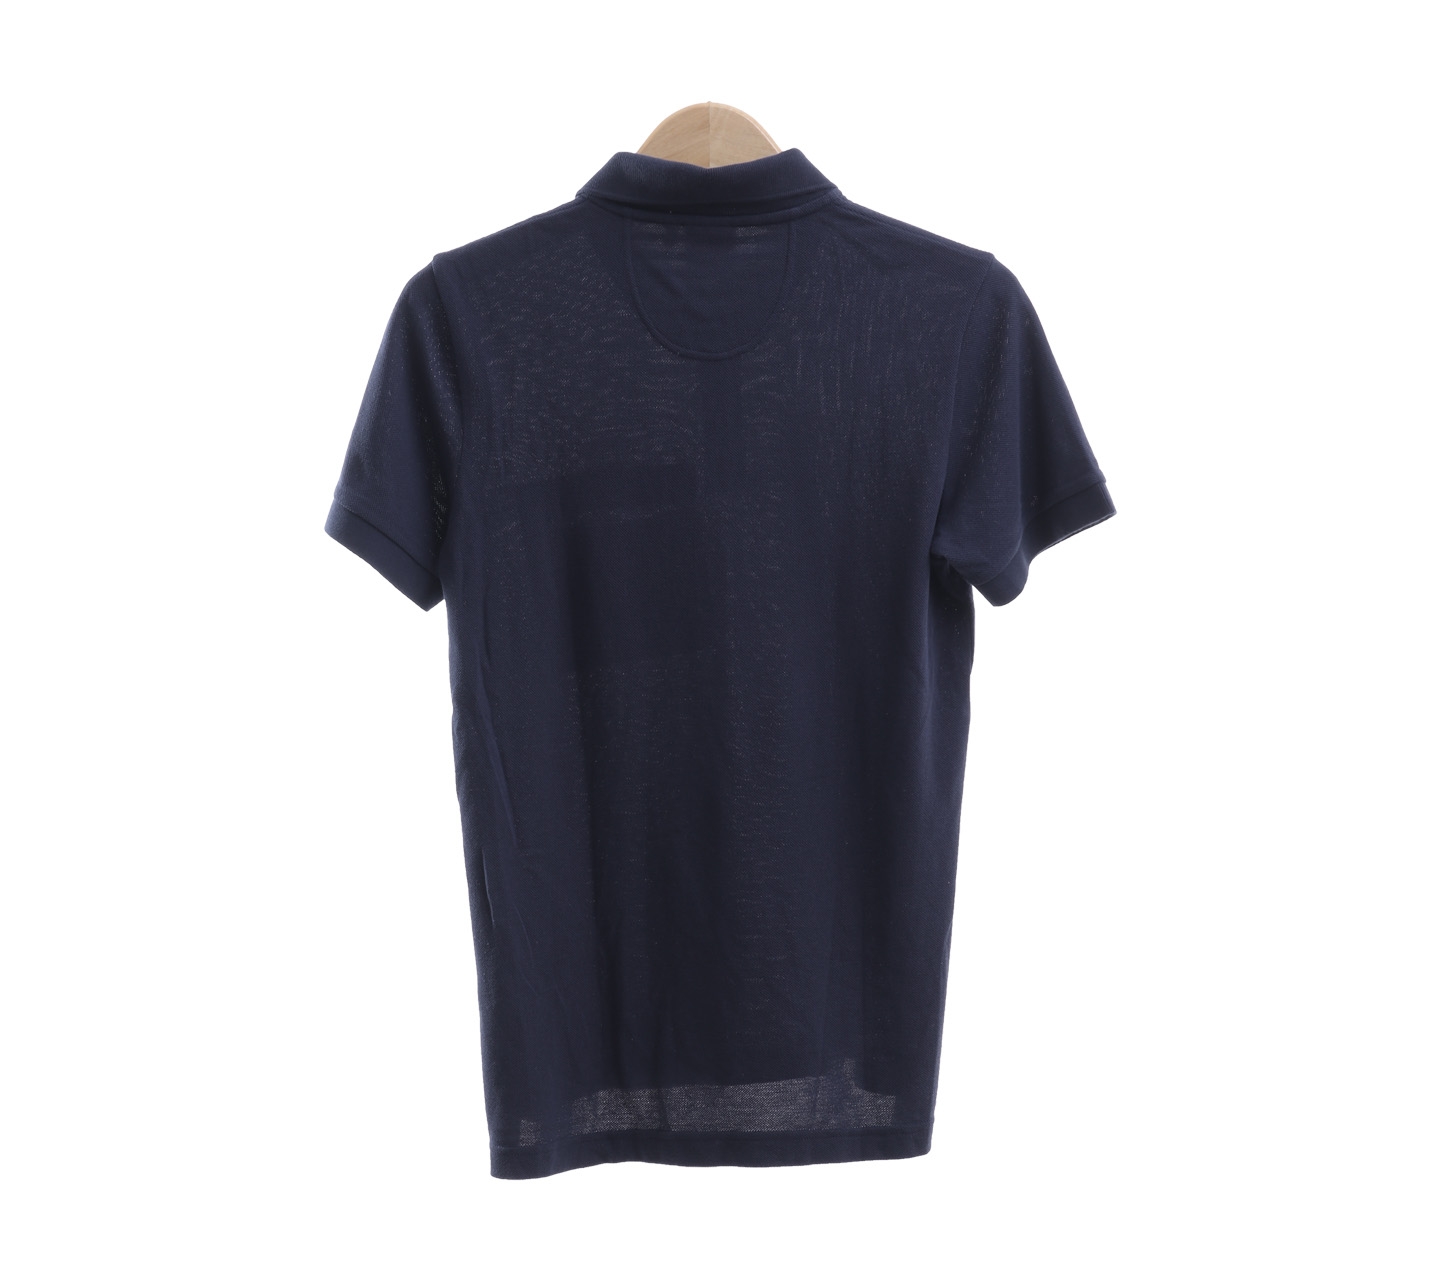 Lacoste Live Navy T-Shirt